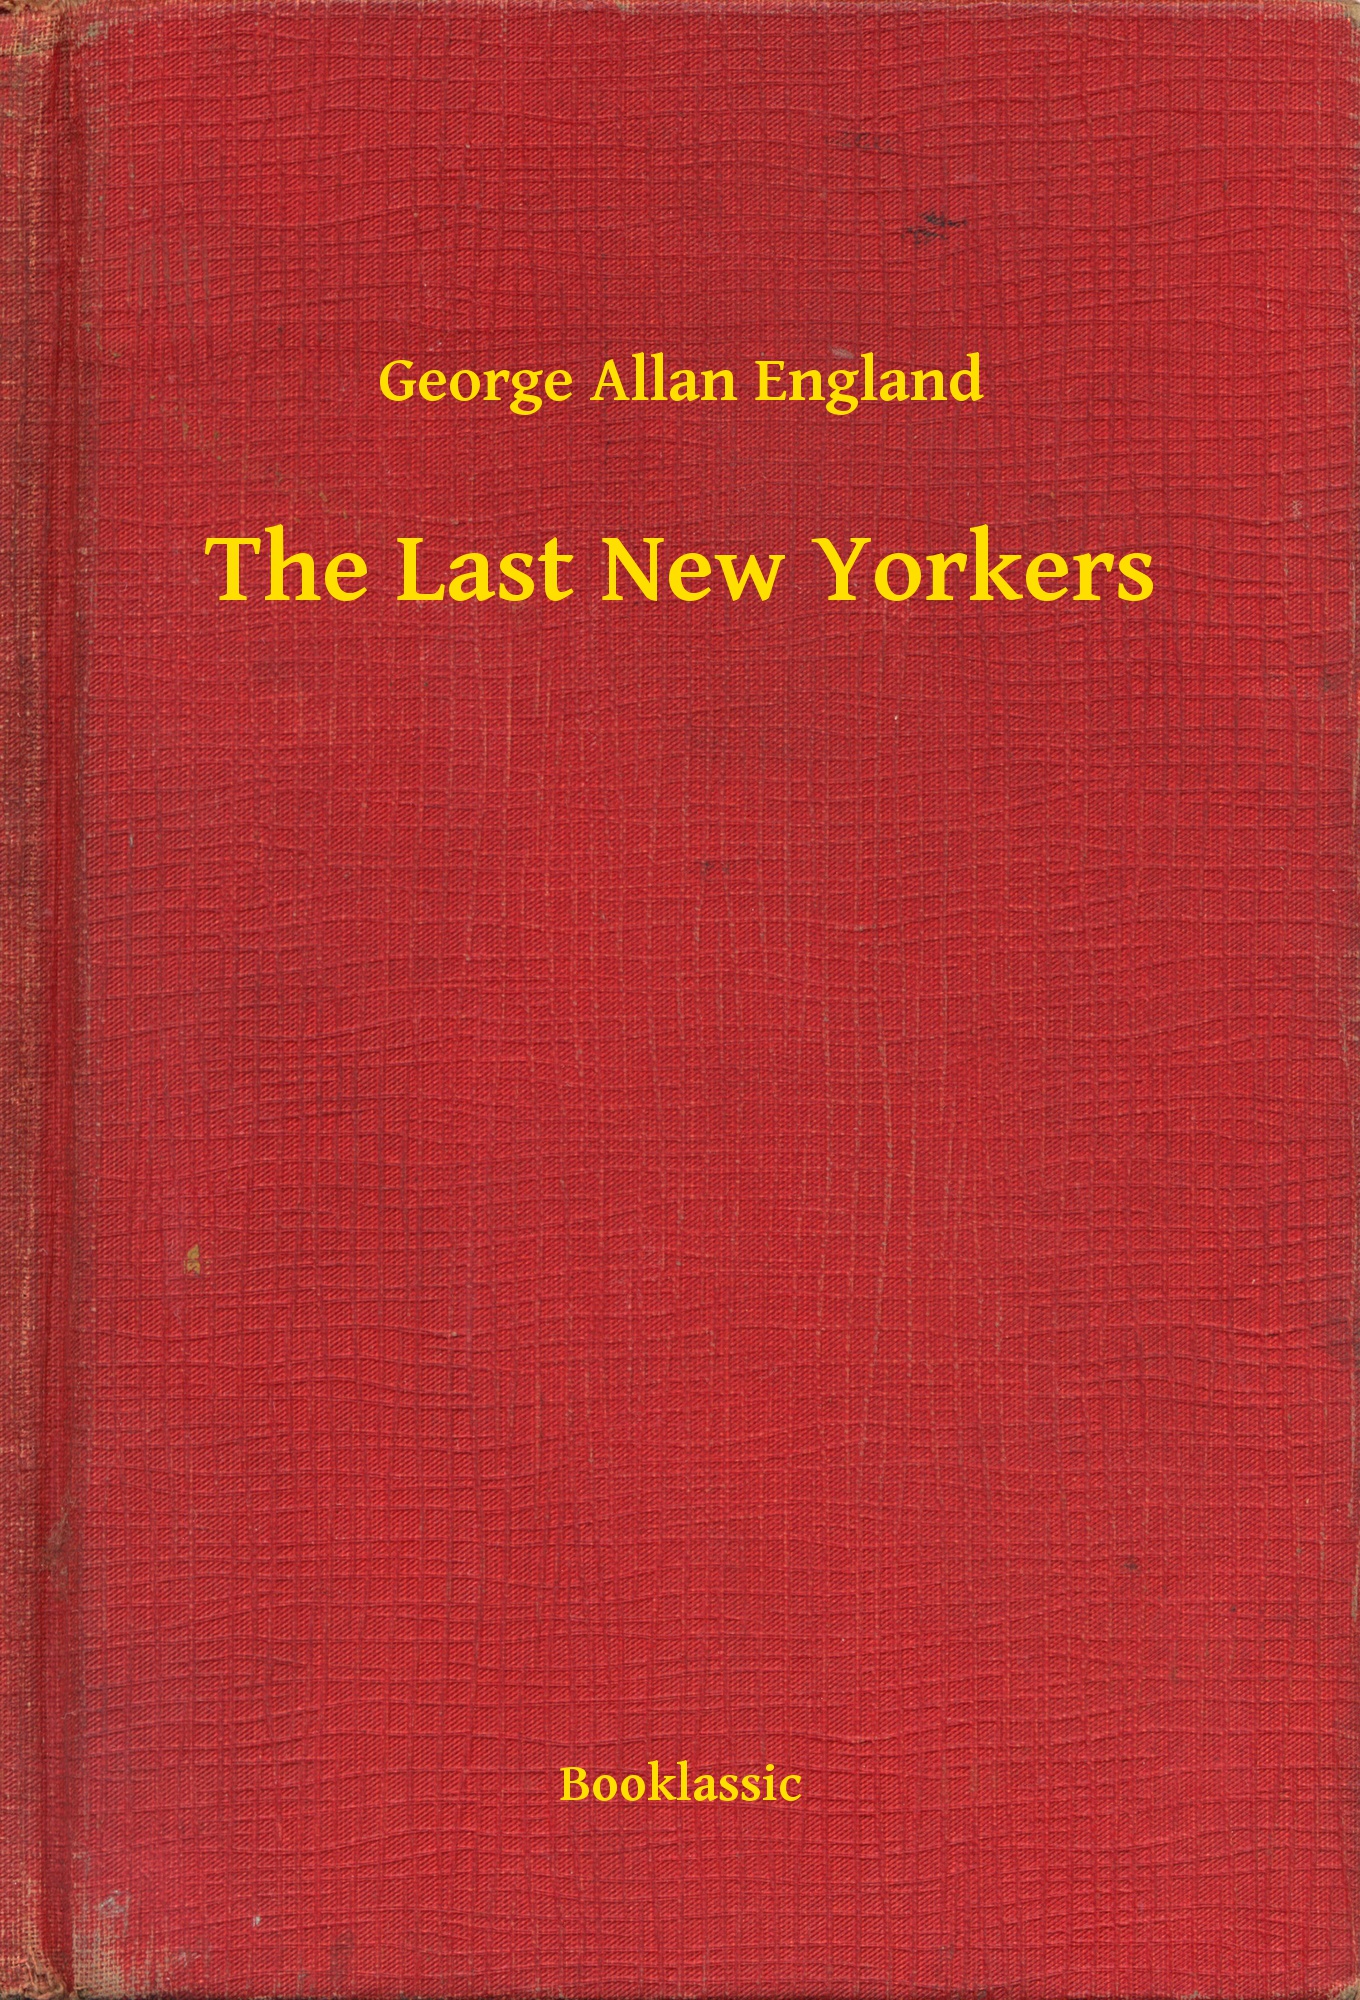 The Last New Yorkers